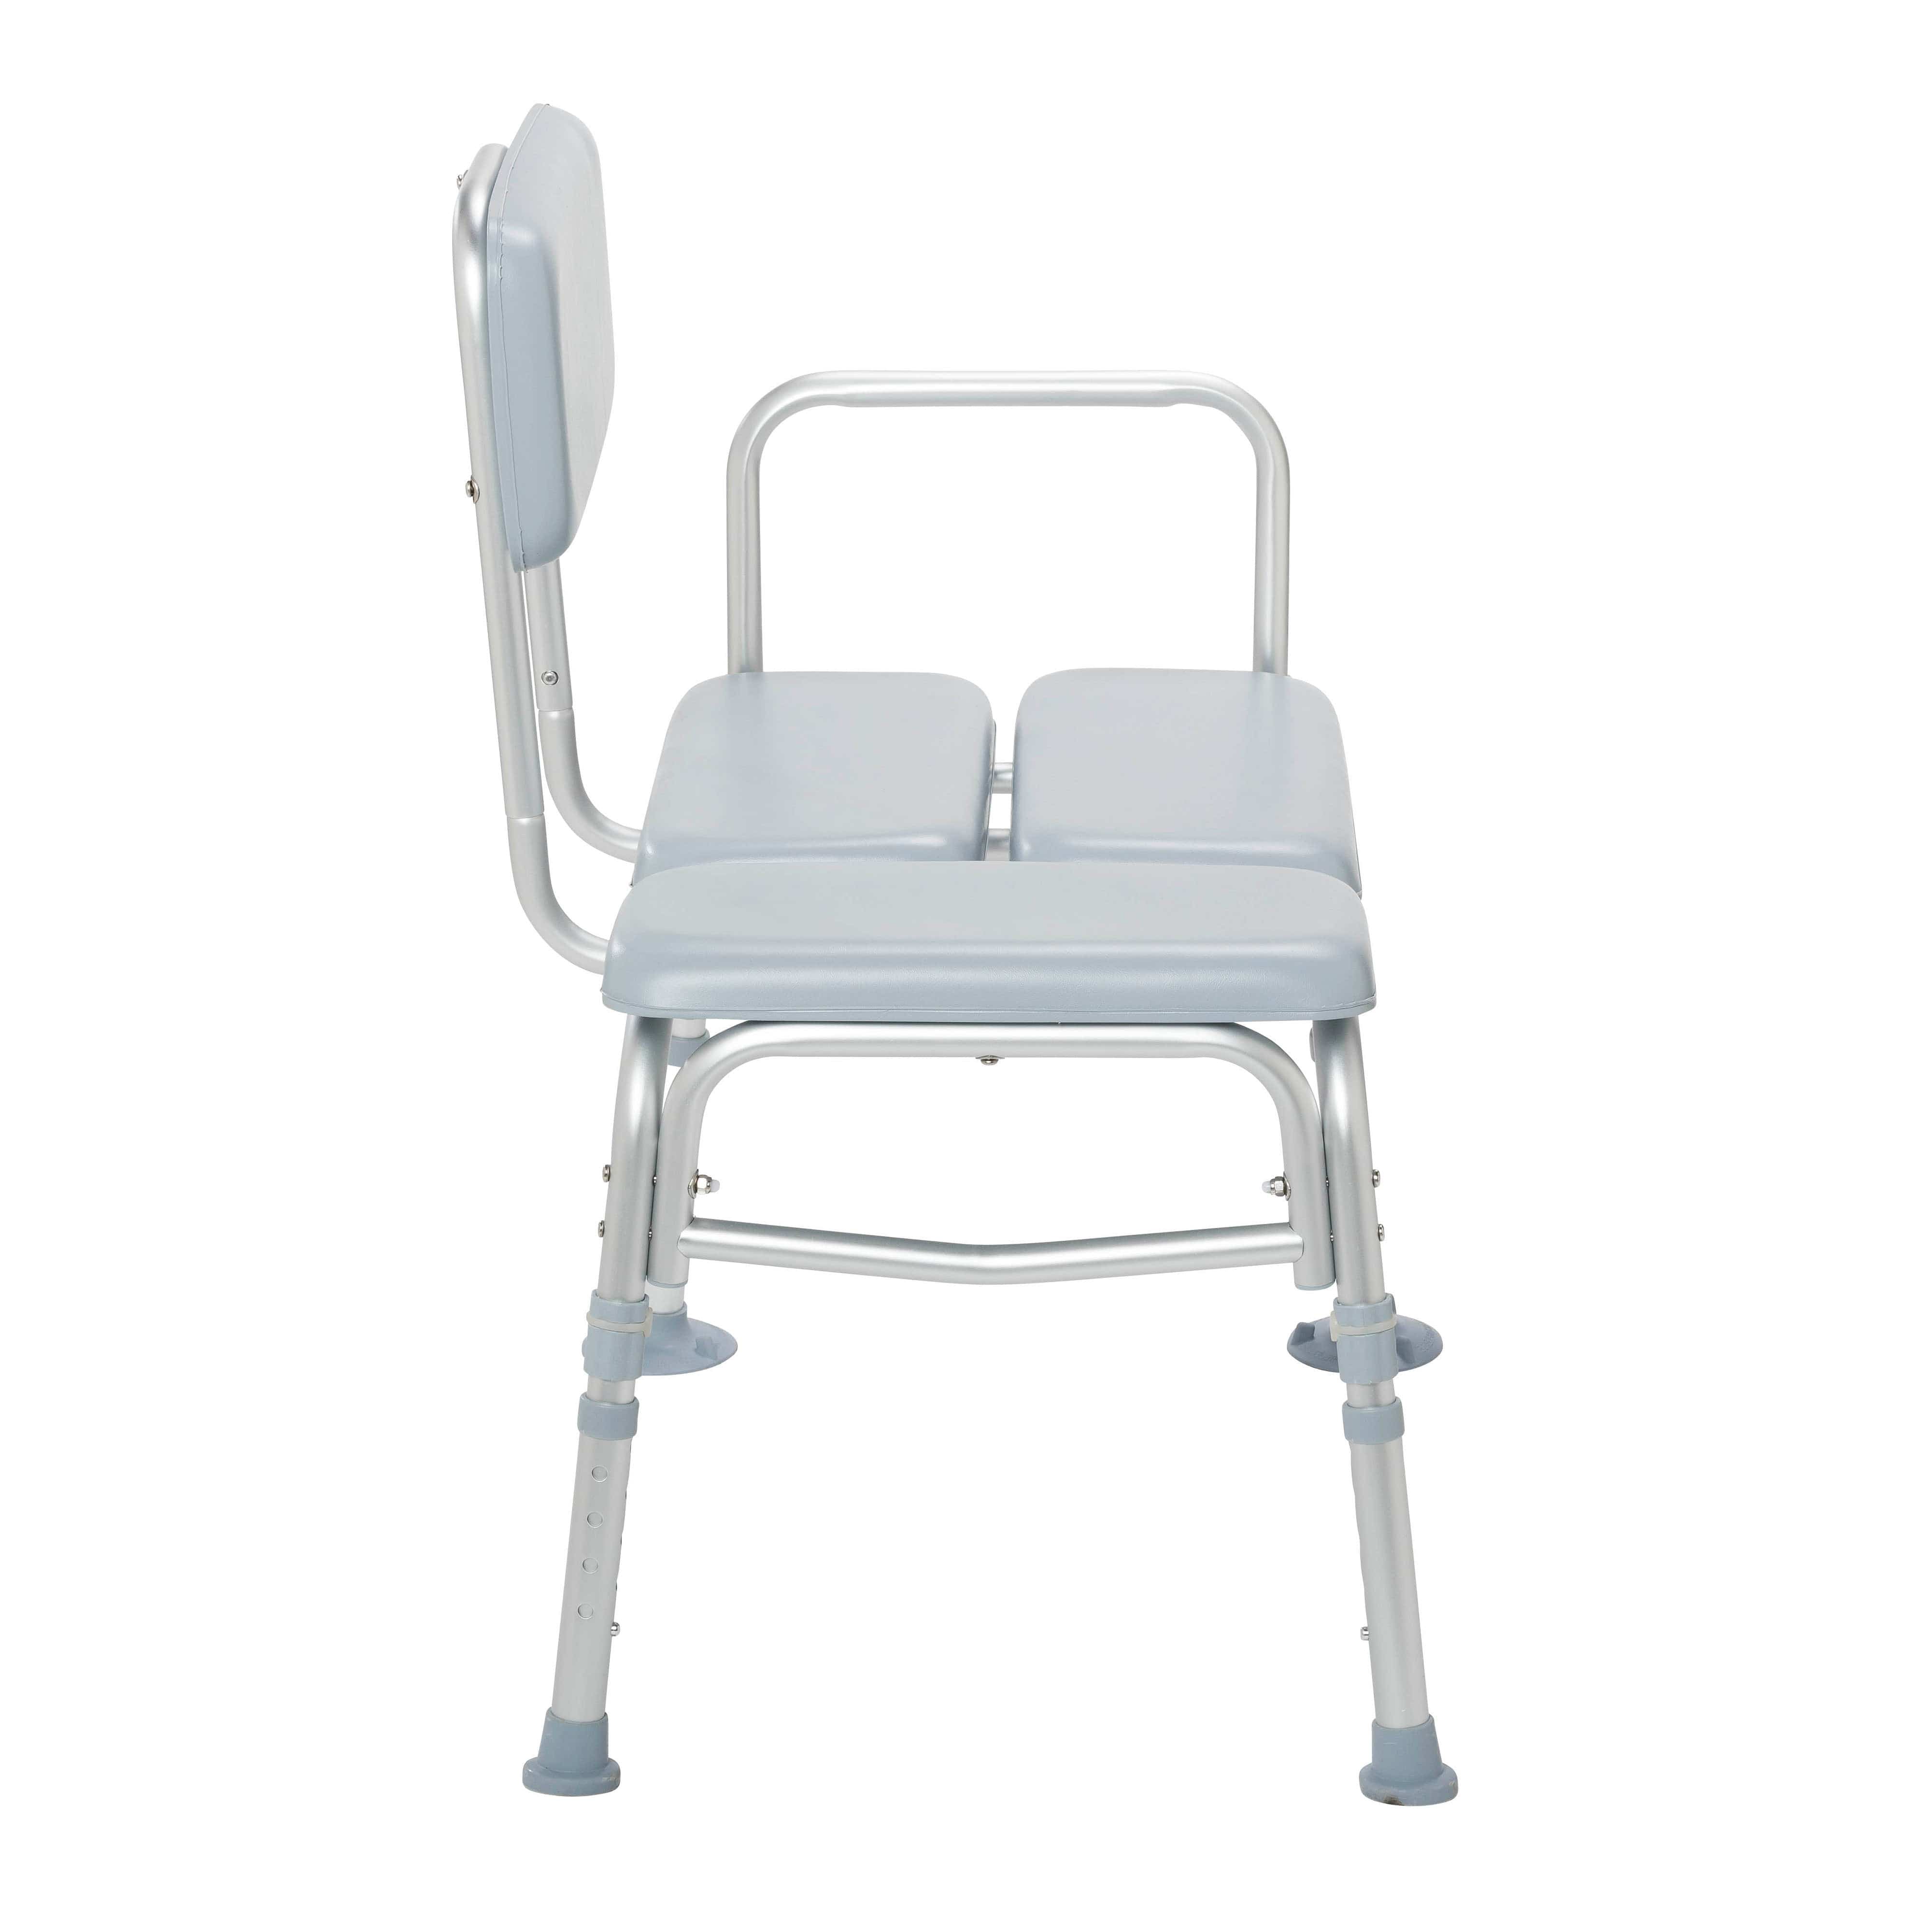 Drive Medical Bathroom Safety Drive Medical Padded Seat Transfer Bench